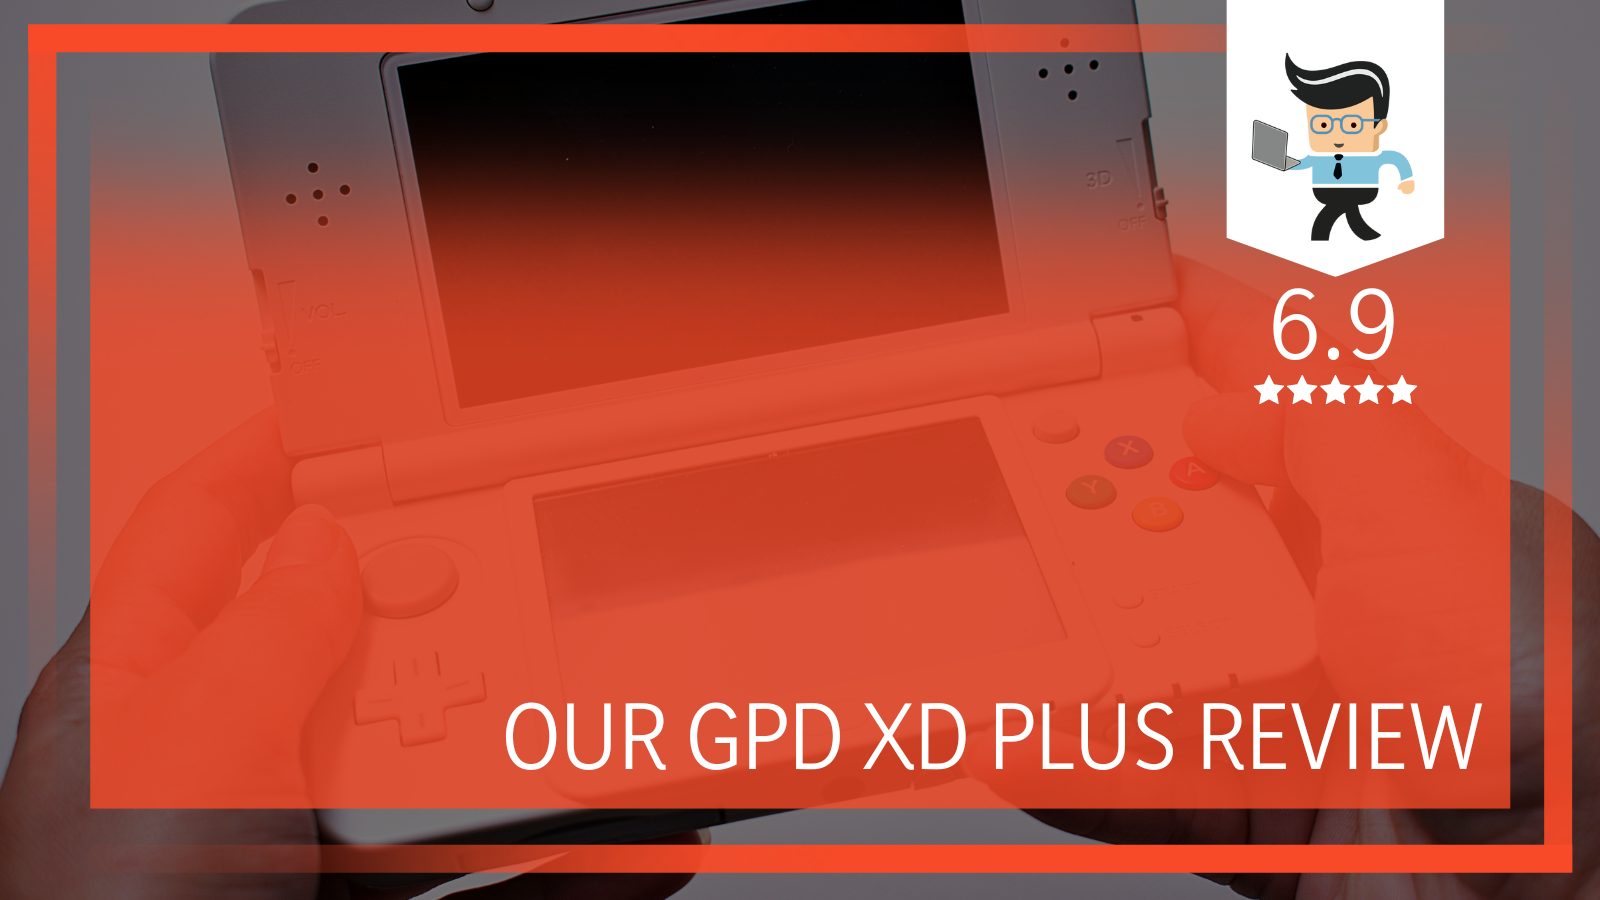 Our GPD XD Plus Review